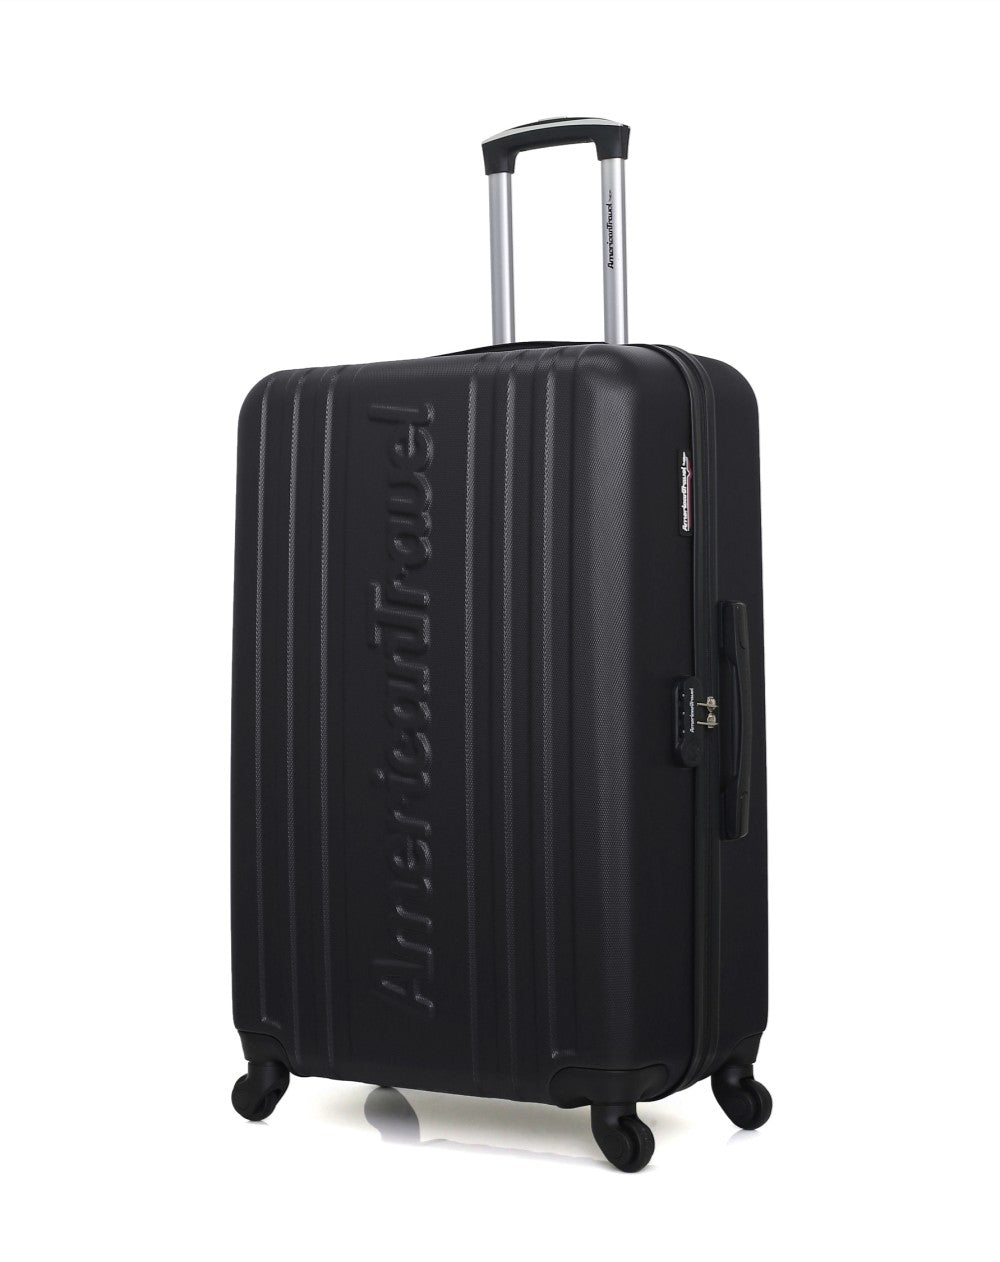 Valise Grand Format ABS SPRINGFIELD 4 Roues 75 cm